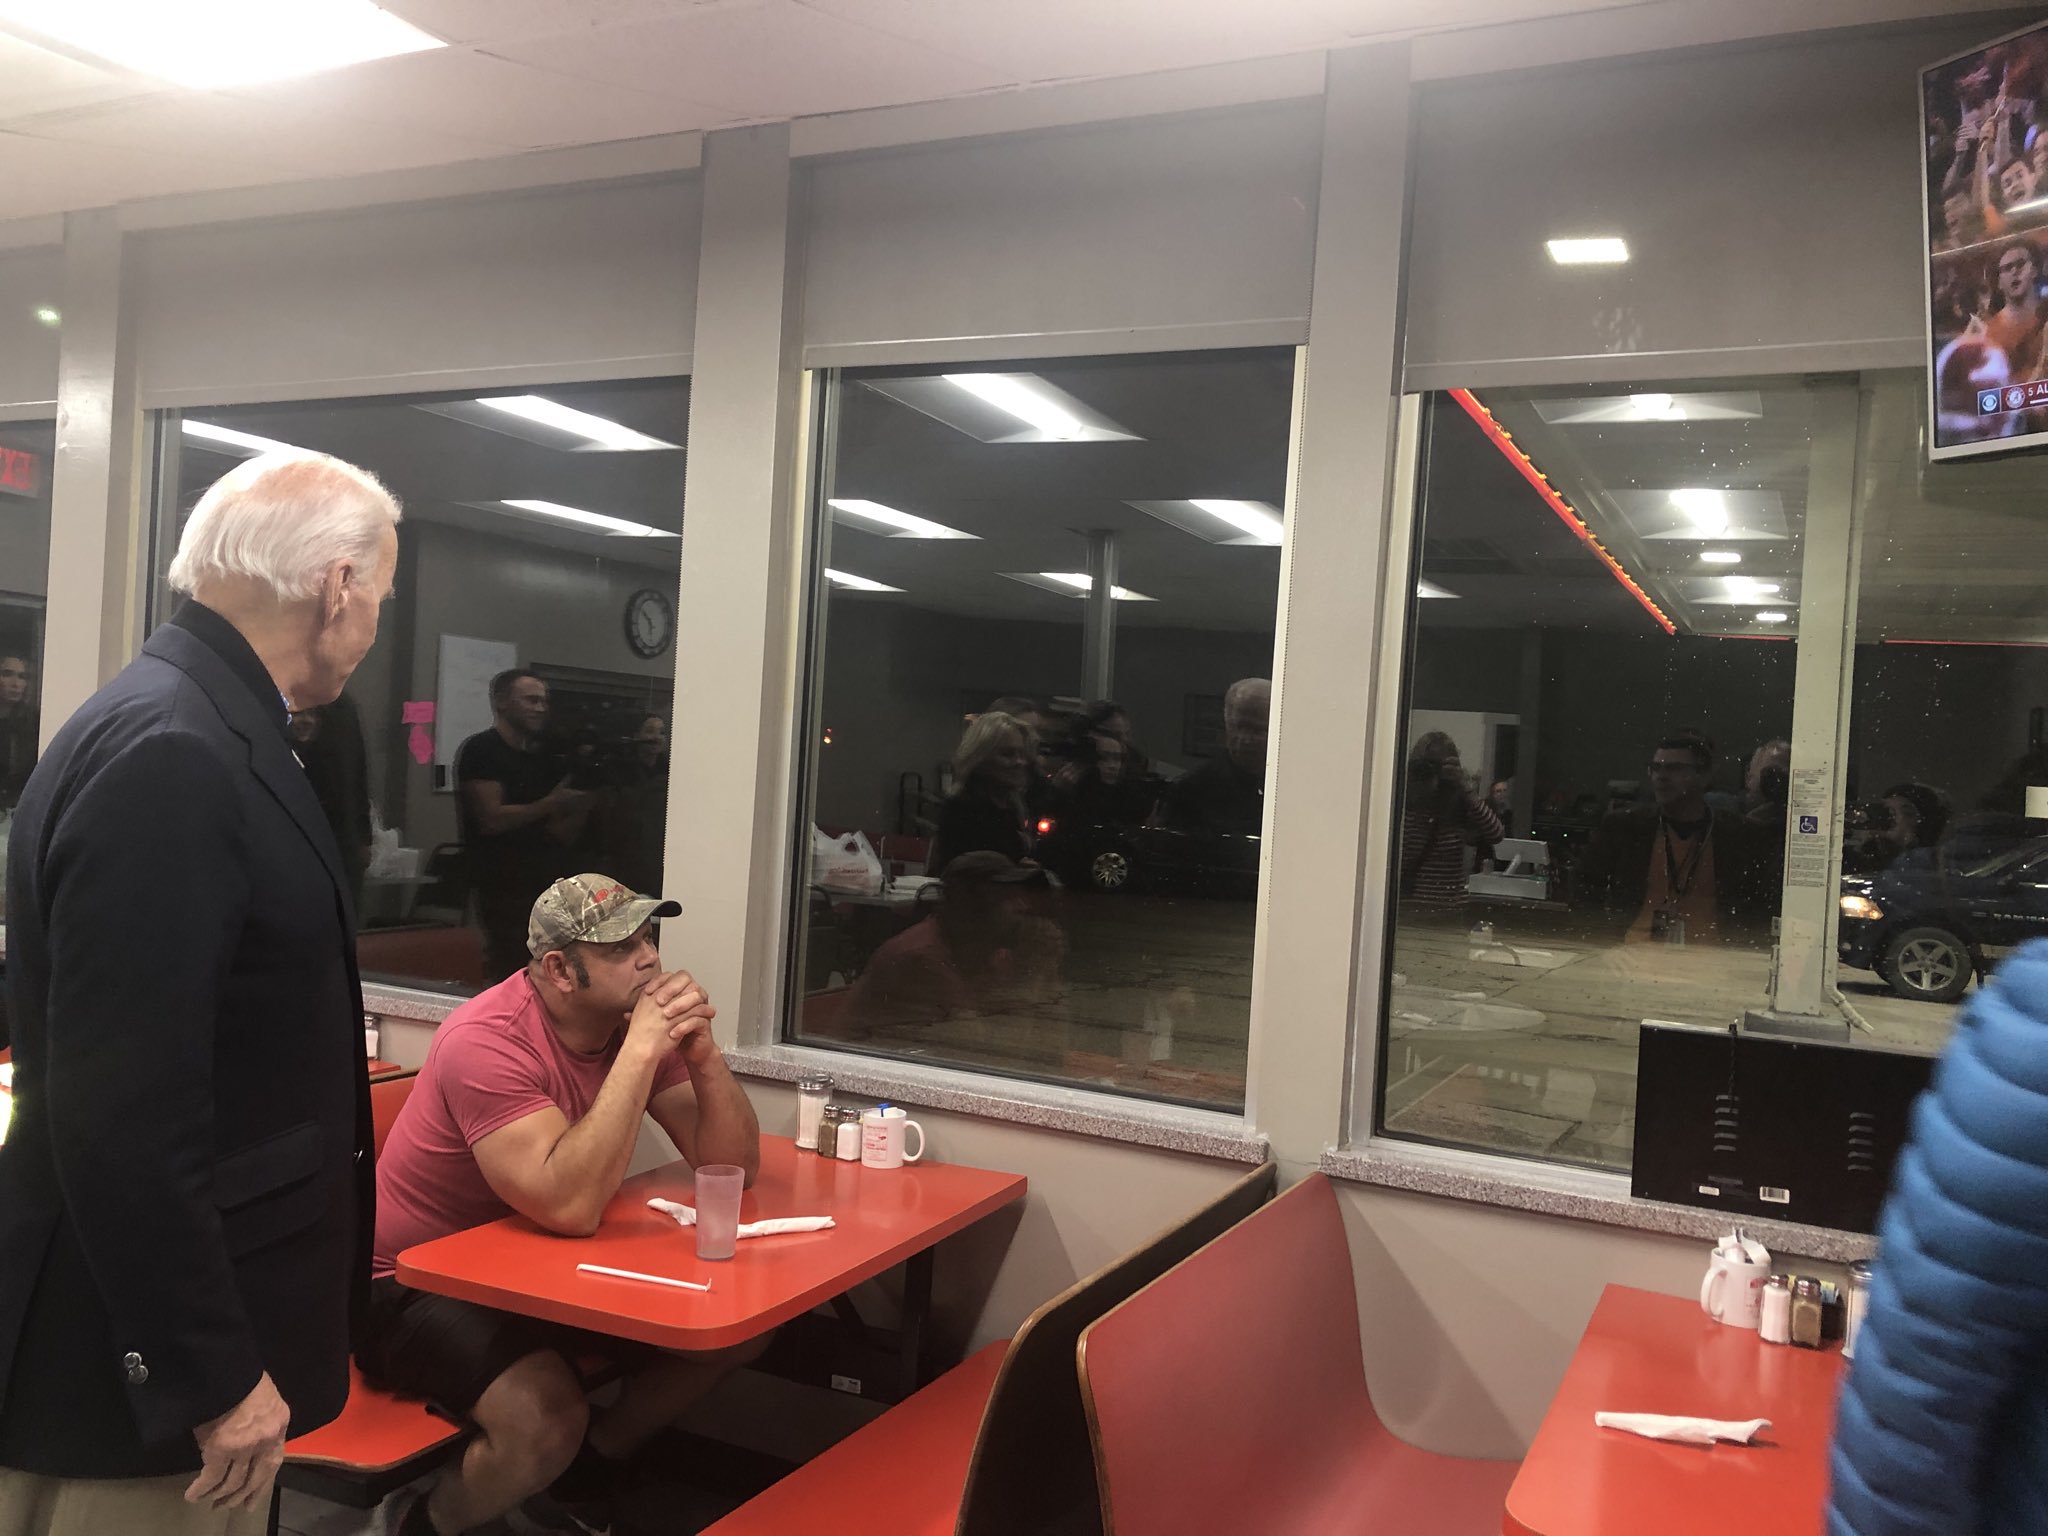 Man Ignores Joe Biden While Watching a Football Game at Diner in Iowa